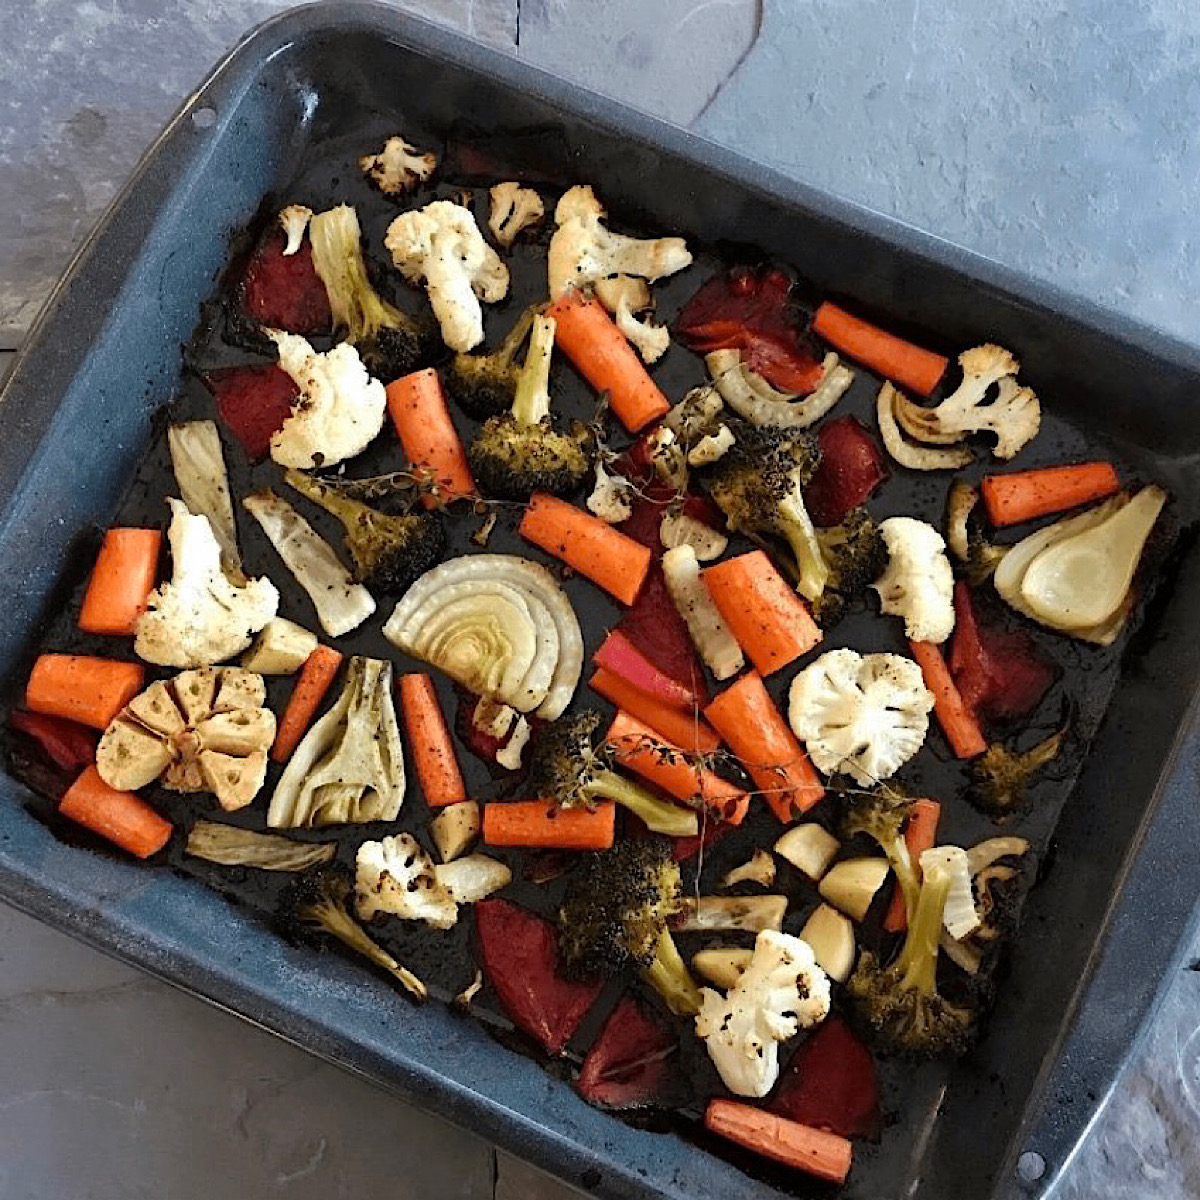 Sheet pan roasted vegetables drizzled with a fruit vinegar before roasting.